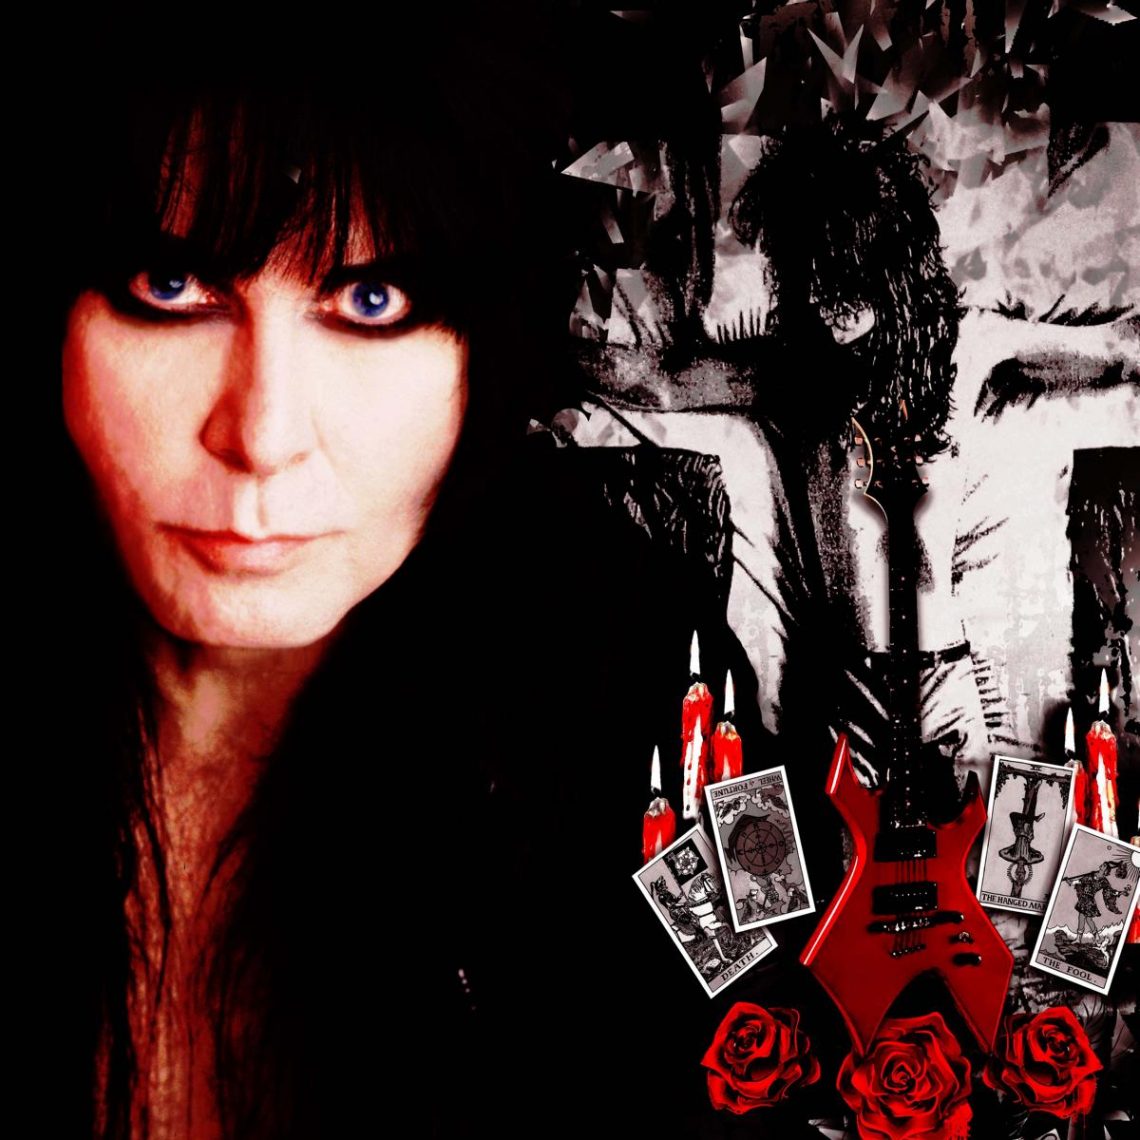 W.A.S.P. – release another video clip for “Doctor Rockter” taken from “ReIdolized (The Soundtrack to the Crimson Idol)”!